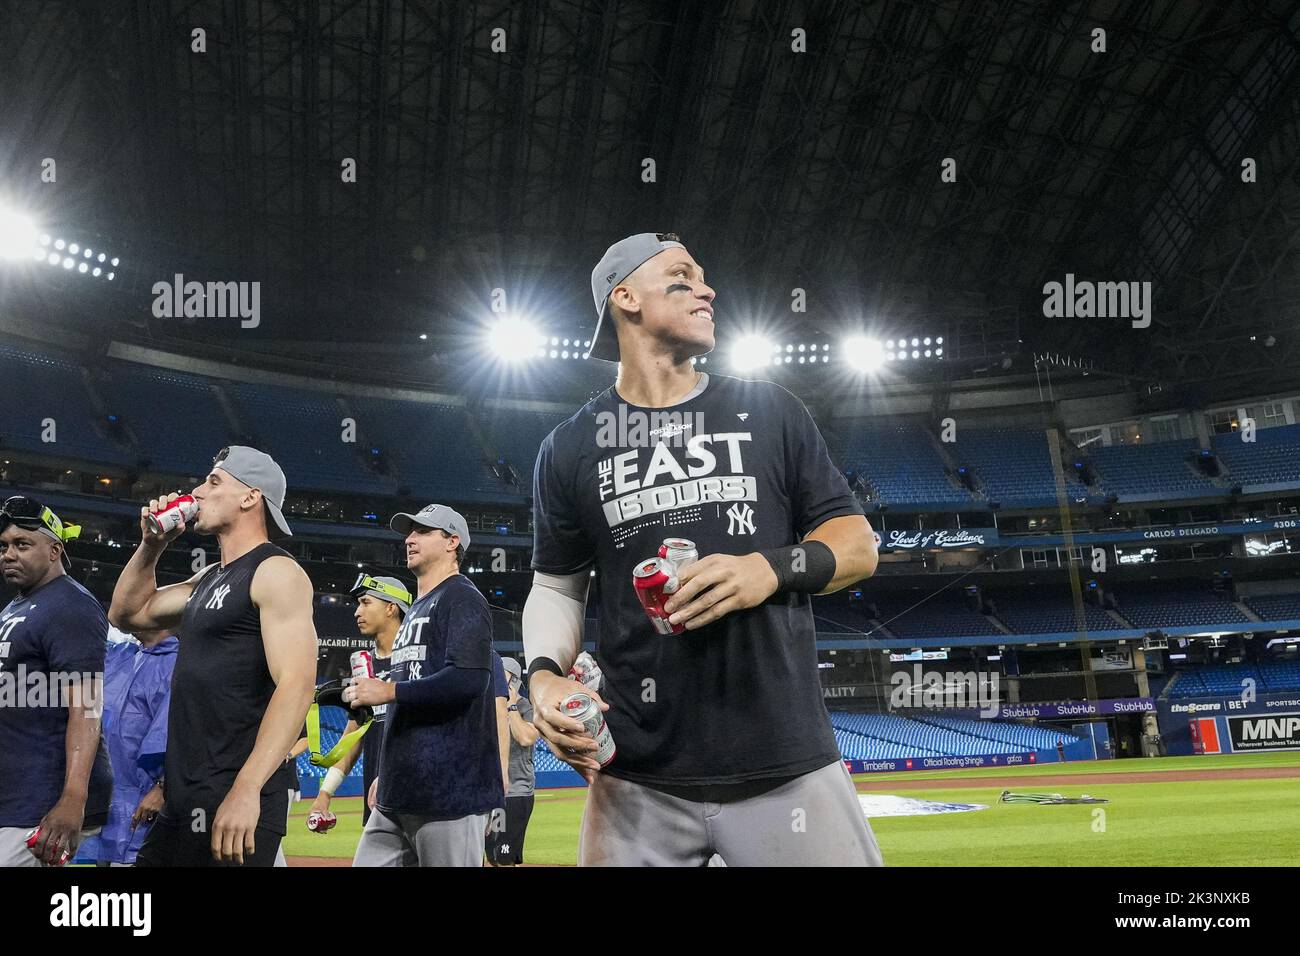 Toronto, Canada. 25th Sep, 2022. New York Yankees center fielder Aaron Judge celebrates on the field after defeating the Toronto Blue Jays to clinch the AL East at Rogers Centre in Toronto, Canada on Tuesday, September 27, 2022. Photo by Andrew Lahodynskyj/UPI Credit: UPI/Alamy Live News Stock Photo